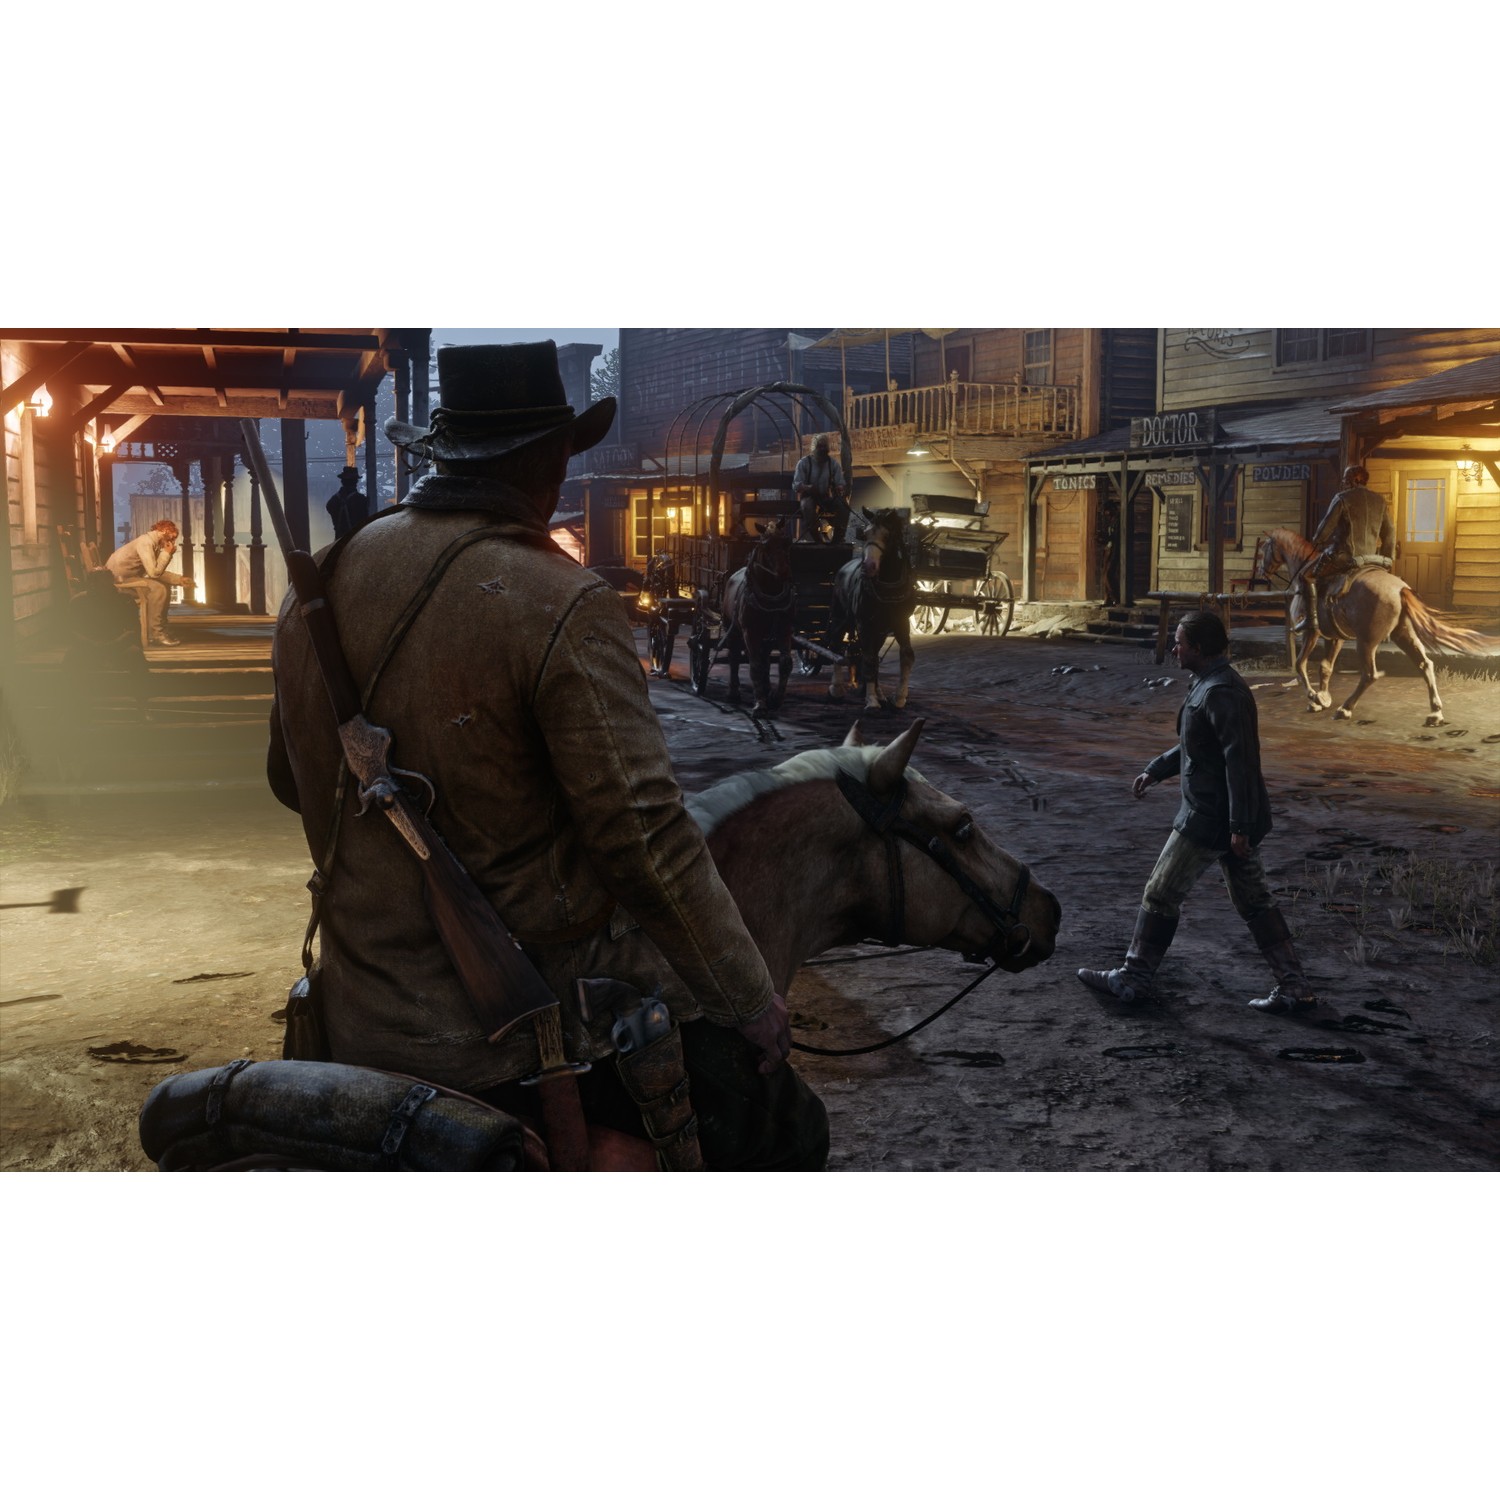 Xbox one игры red dead redemption. Red Dead Redemption 2 ps4. Ред дед редемпшен 2 ps4. Игра на PS 4 ред дед редемпшн. Red Dead Redemption 2 на пс4.